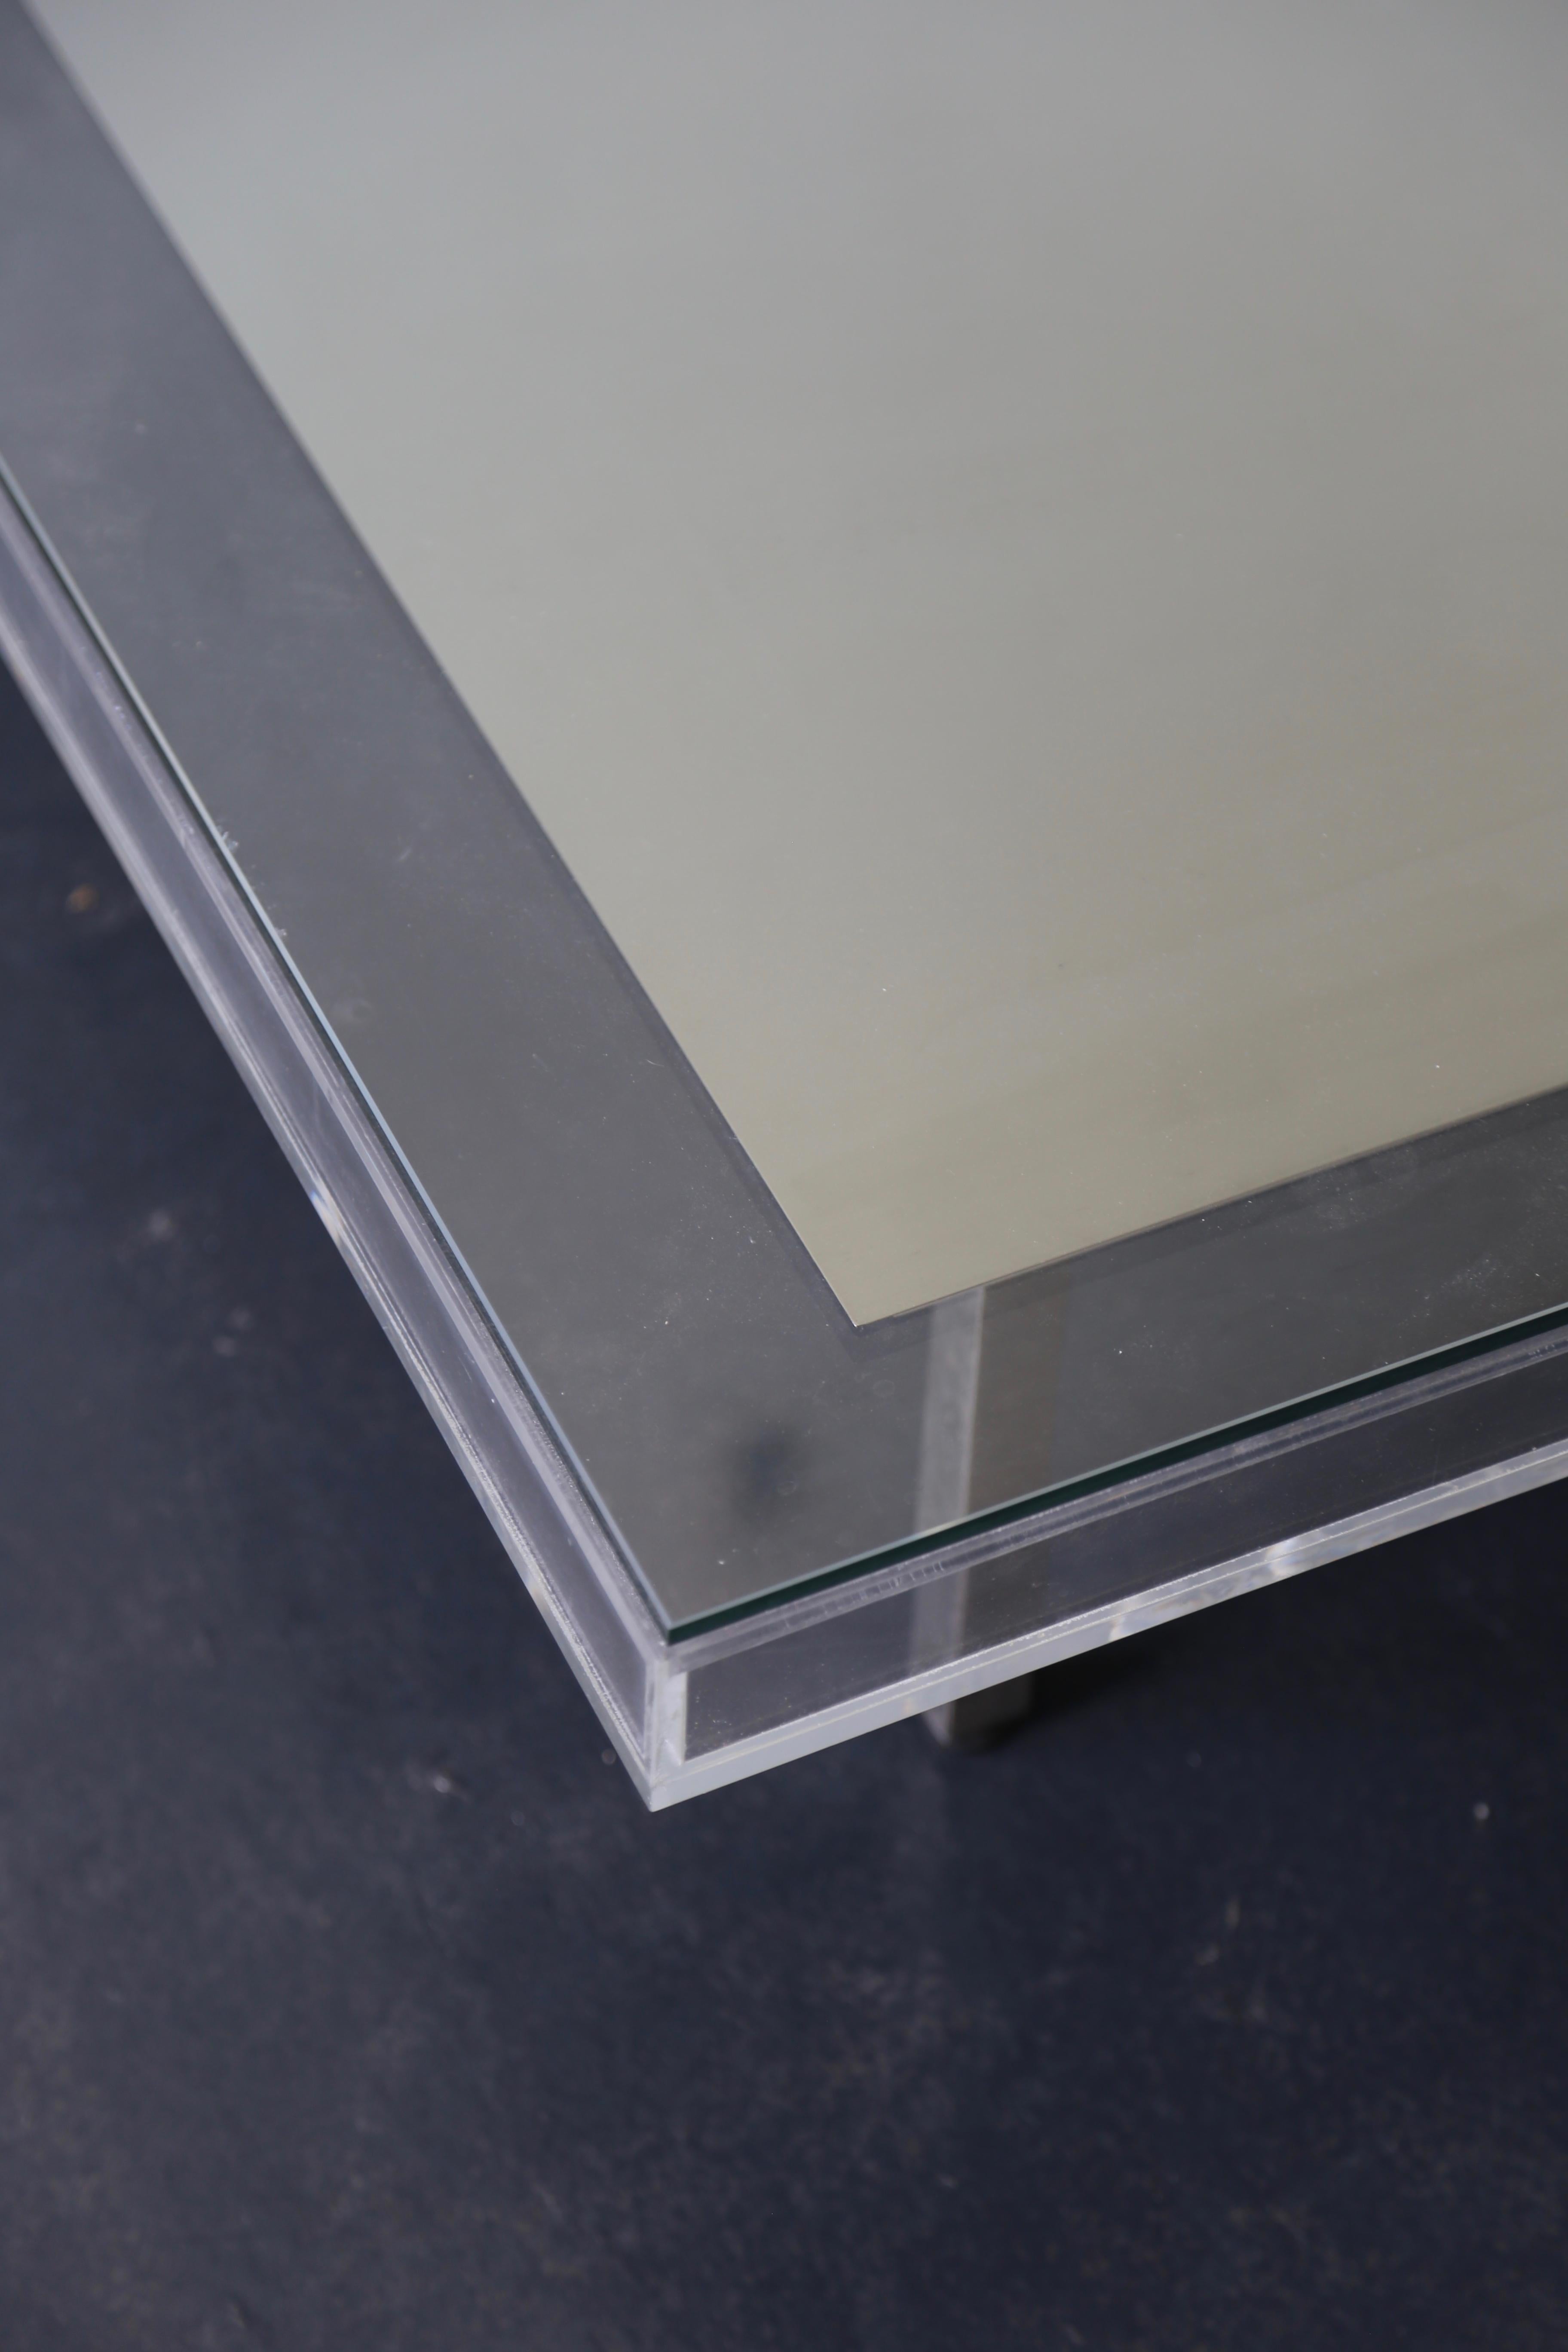 This modern and understated coffee table can act as a frame for whatever artwork you choose to display inside, or even loose pigment after Yves Klein. The structure is brushed steel and the top is glass but available in various metal finishes.  